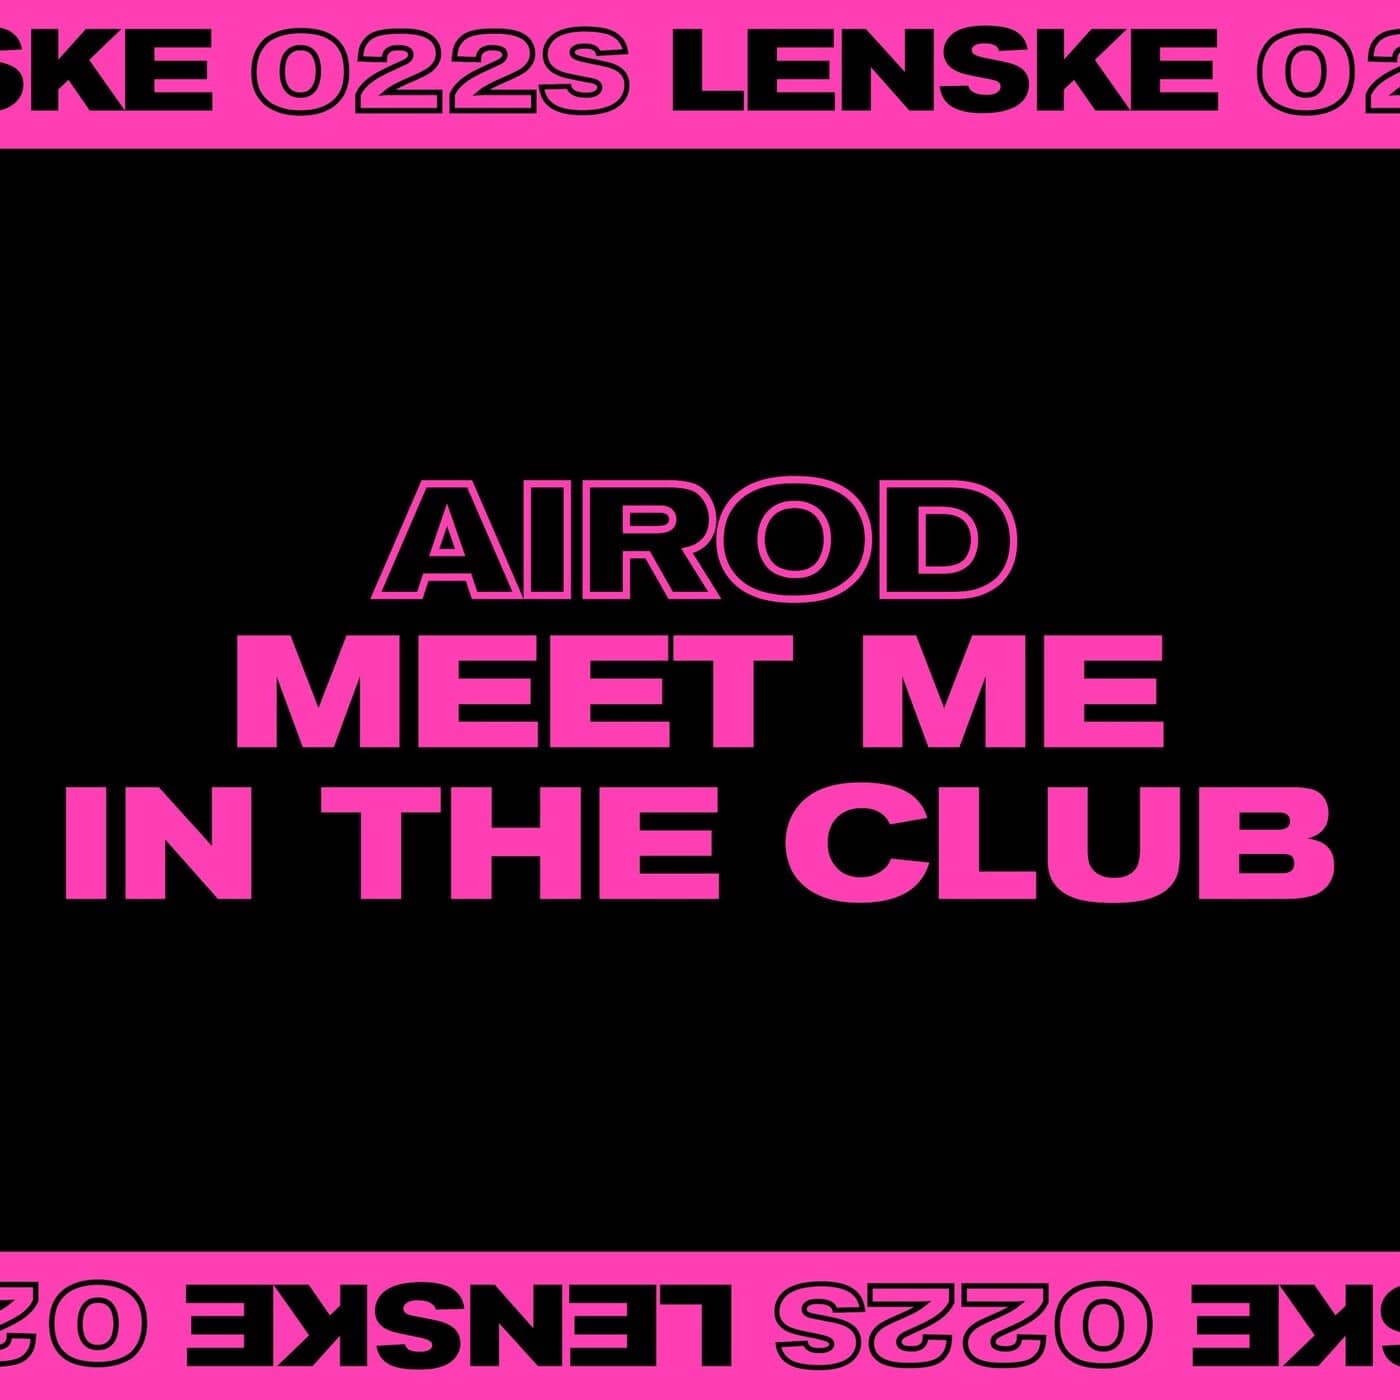 image cover: Airod - Meet Me In The Club / LENSKE022S